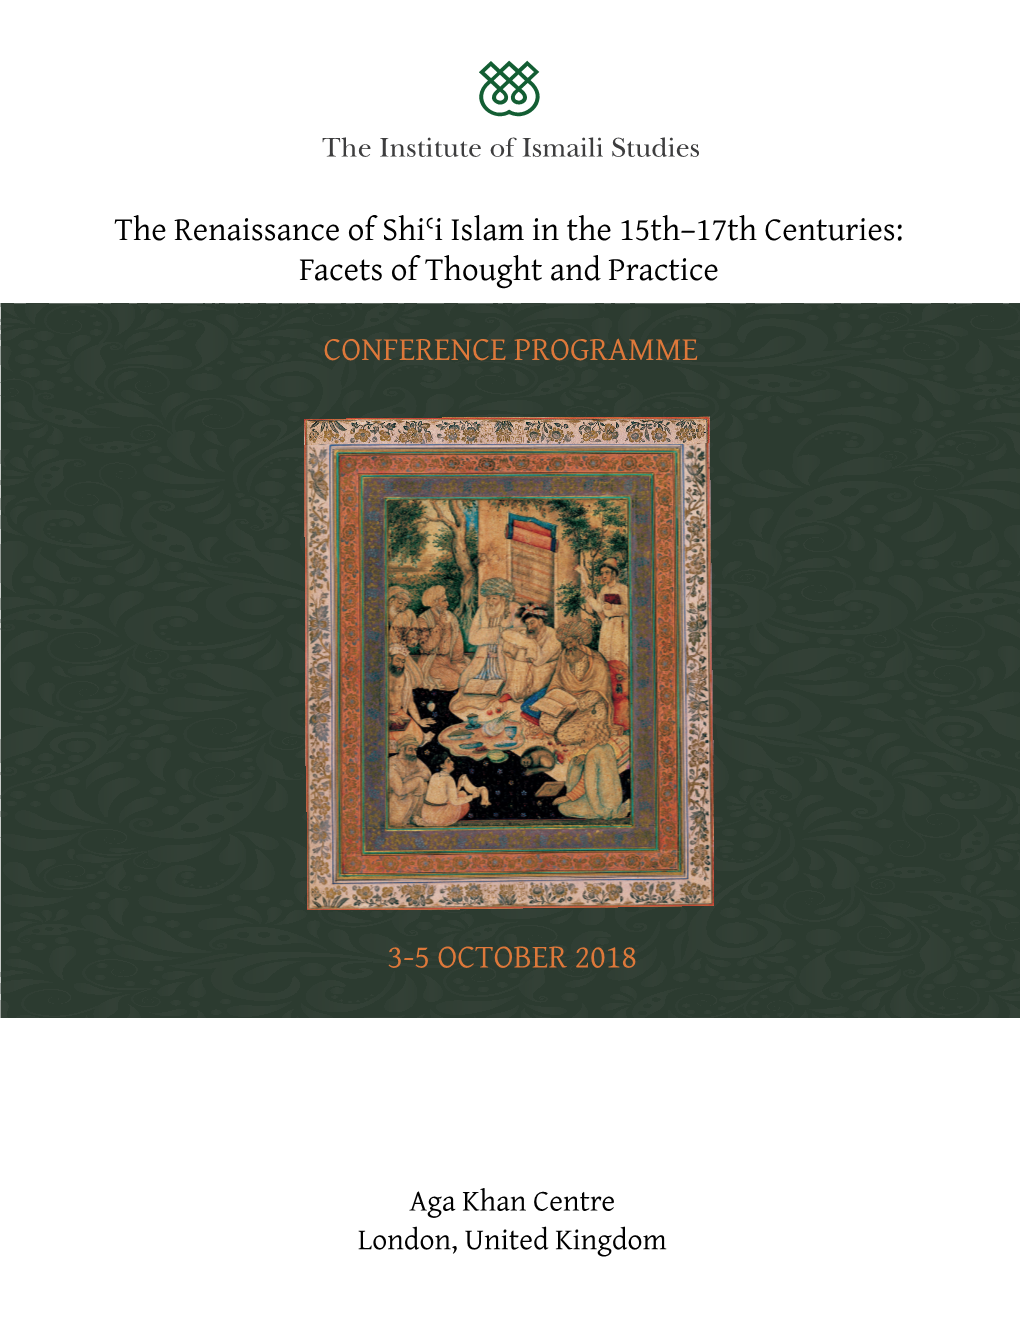 The Renaissance of Shiʿi Islam in the 15Th–17Th Centuries: Facets of Thought and Practice